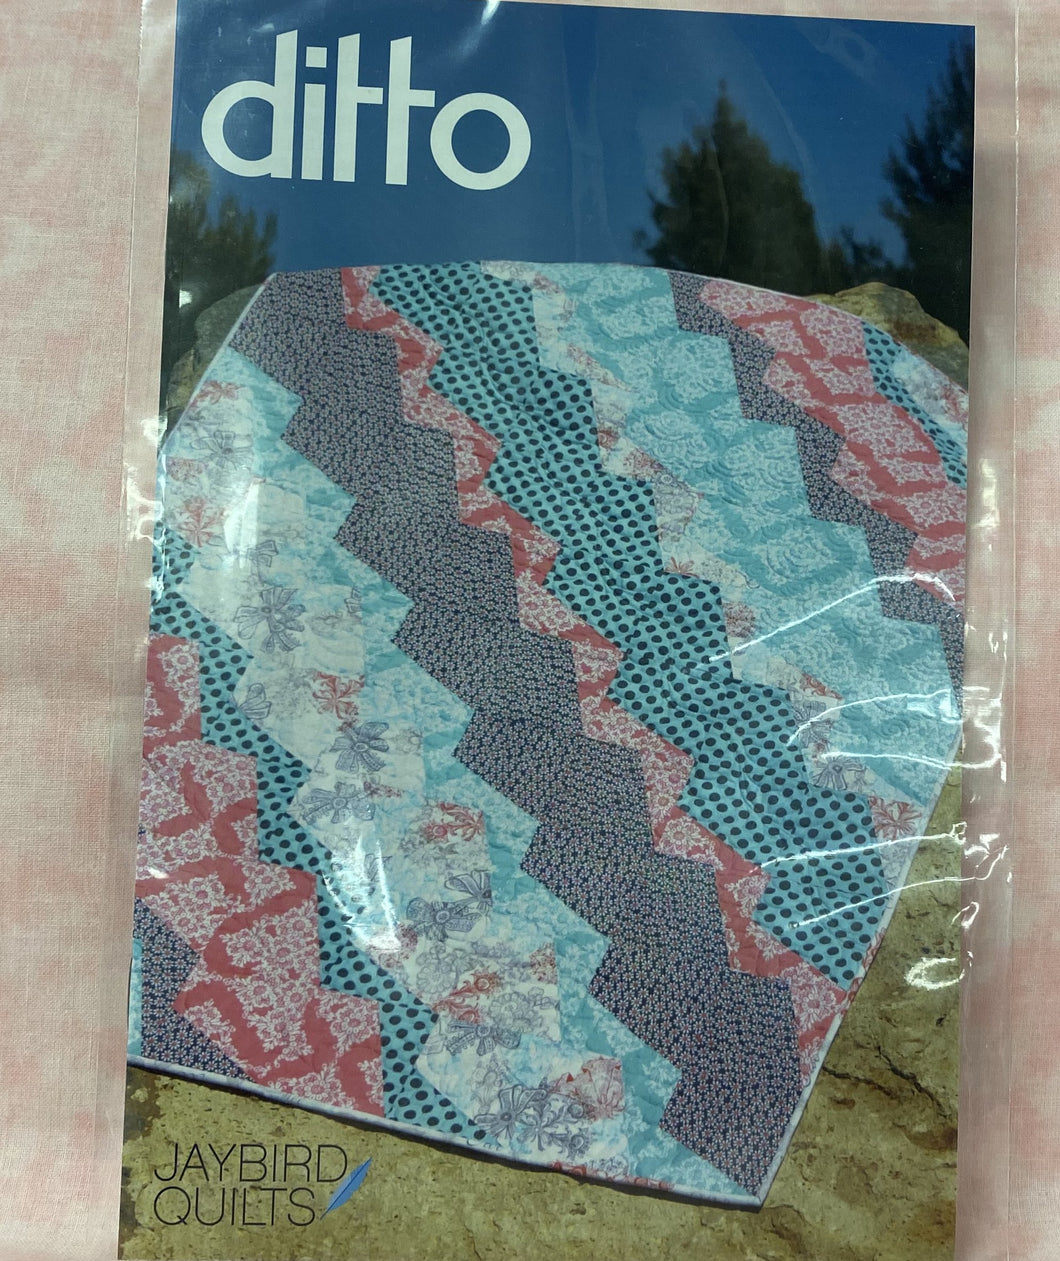 Jaybird Quilts Ditto p25